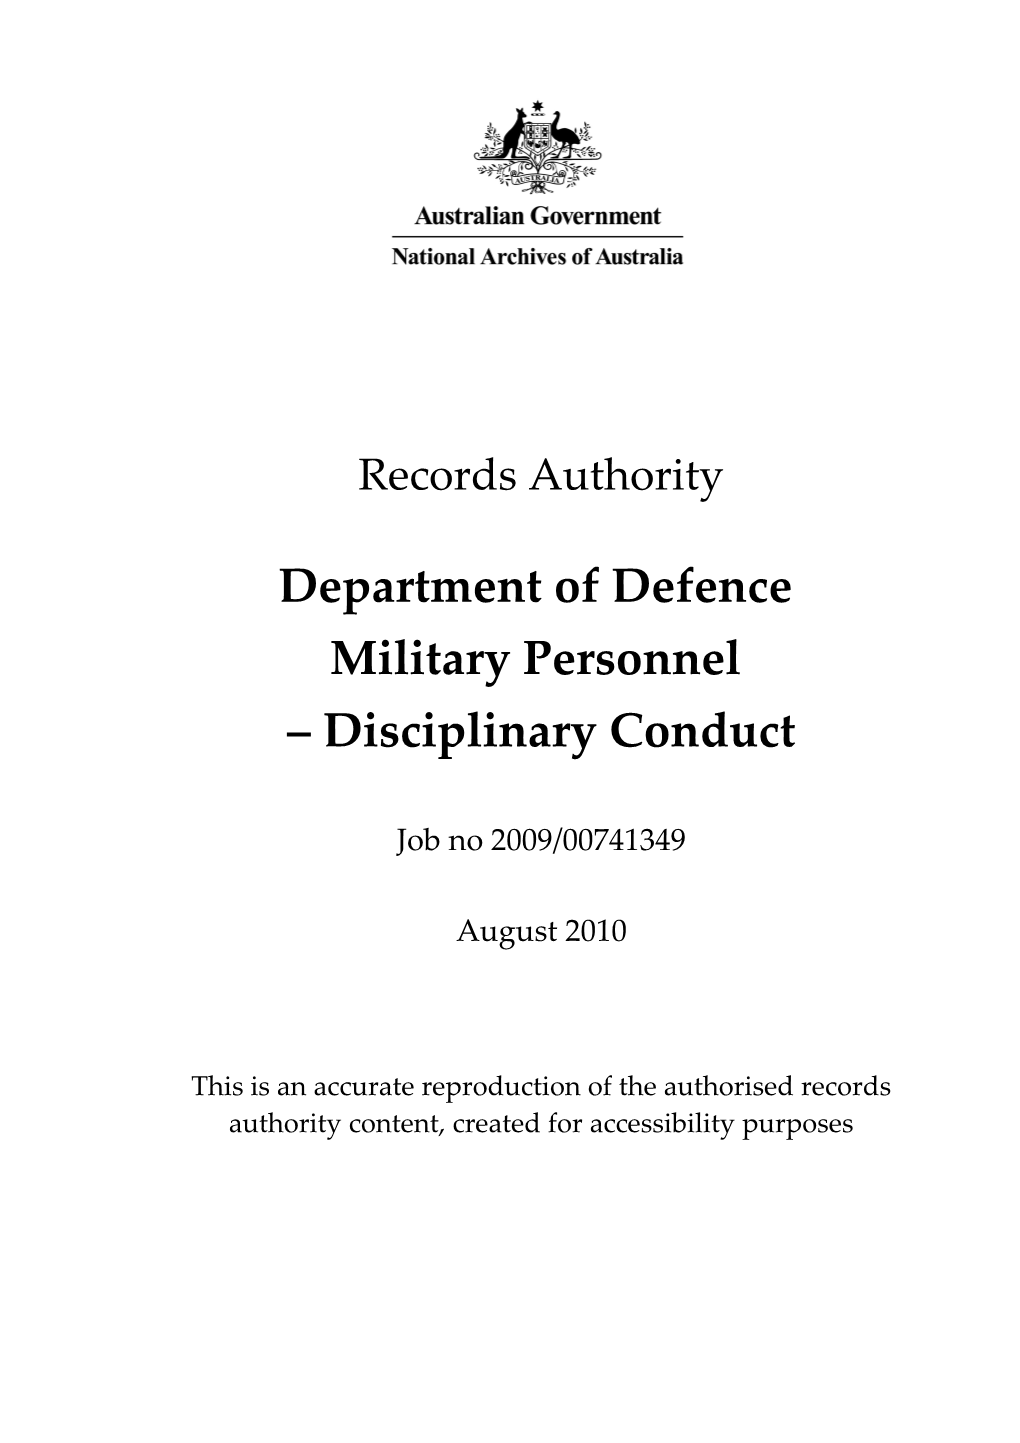 Department of Defence Military Personnel Disciplinary Conduct 2009/00741349